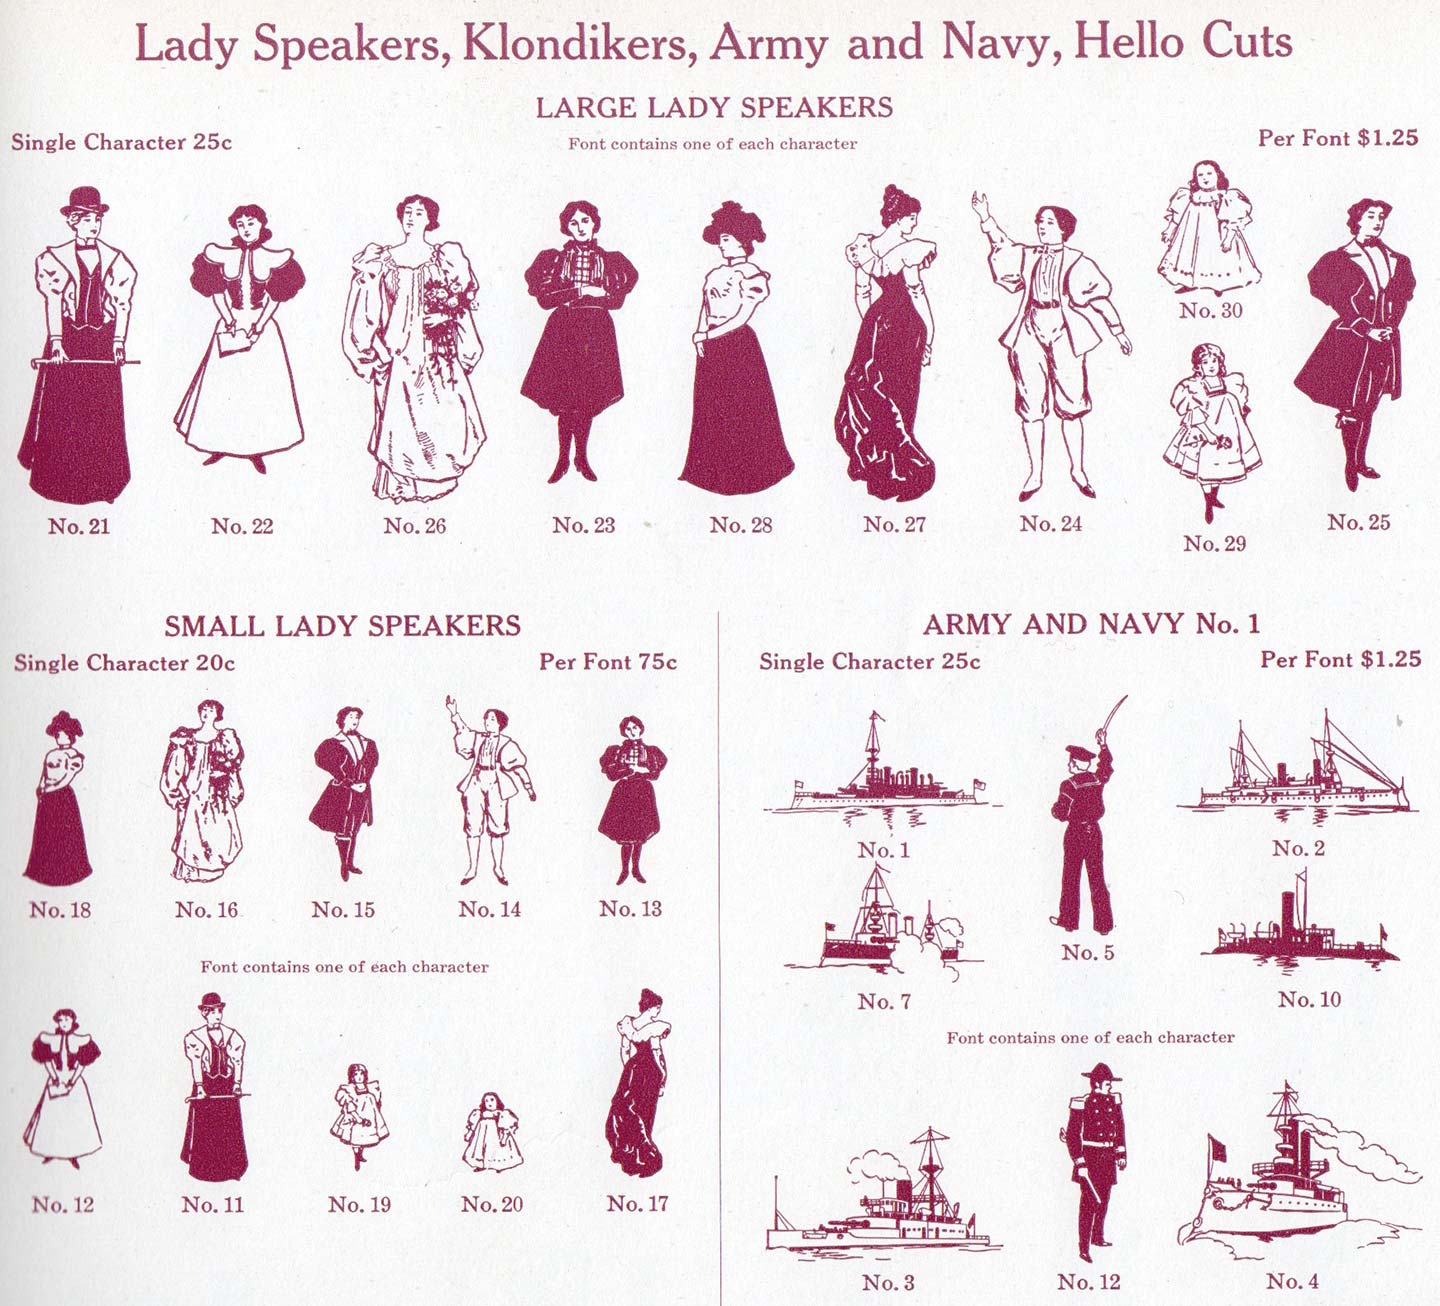 Turns out, it’s never been that hard to find Lady Speakers after all